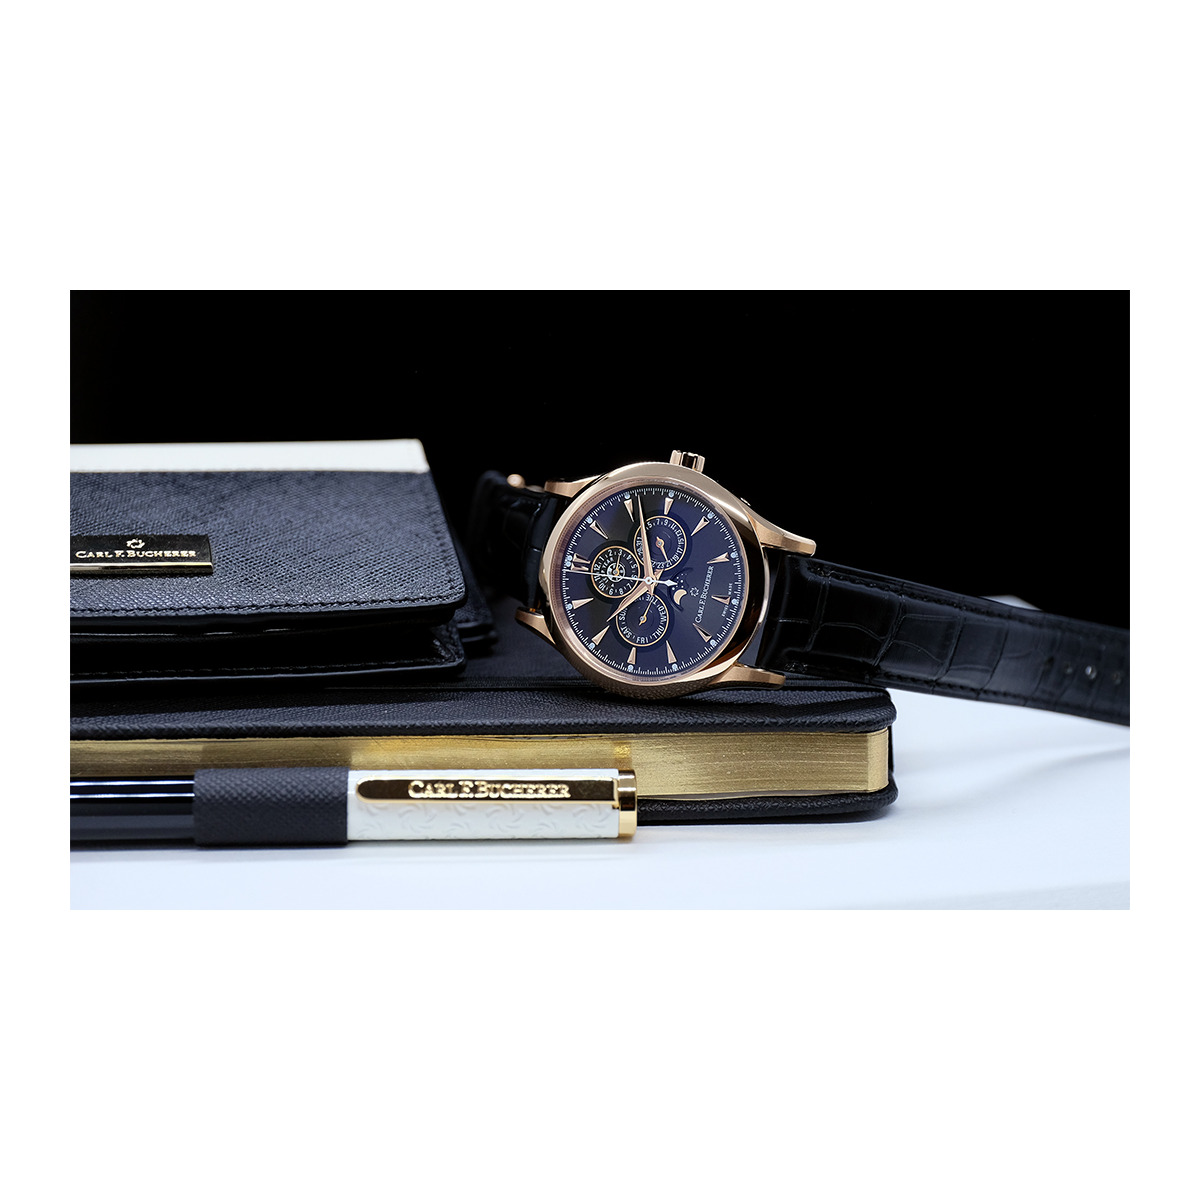 Manero Perpetual Limited Edition 00.10902.03.33.01